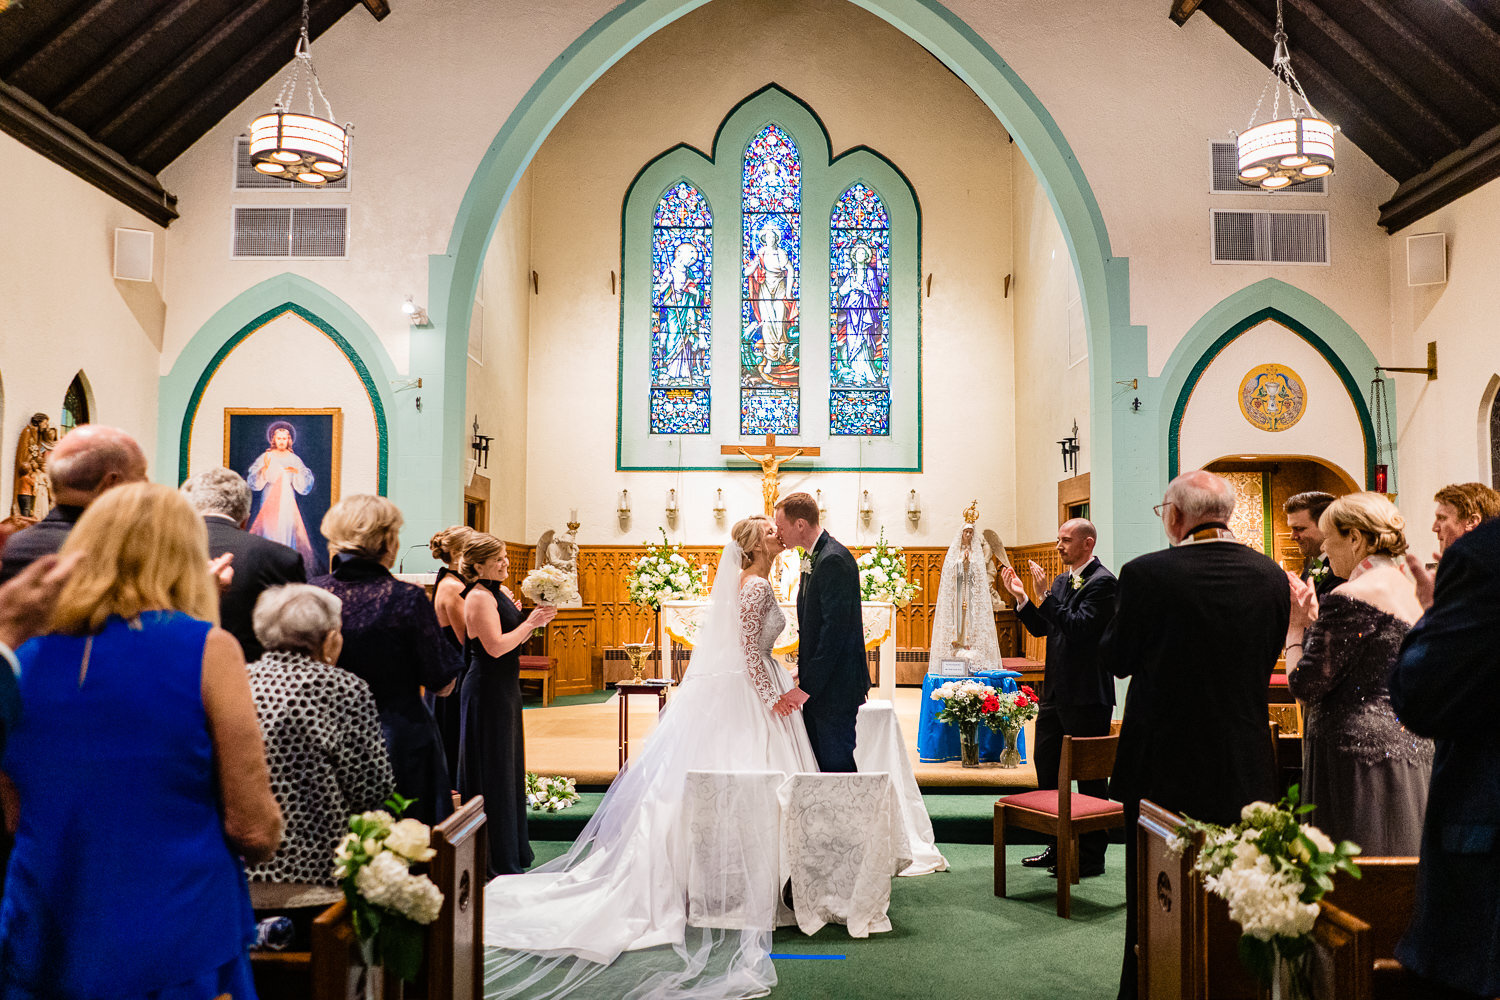 Wedding ceremony at St. Margaret's Church in Pearl River, NY